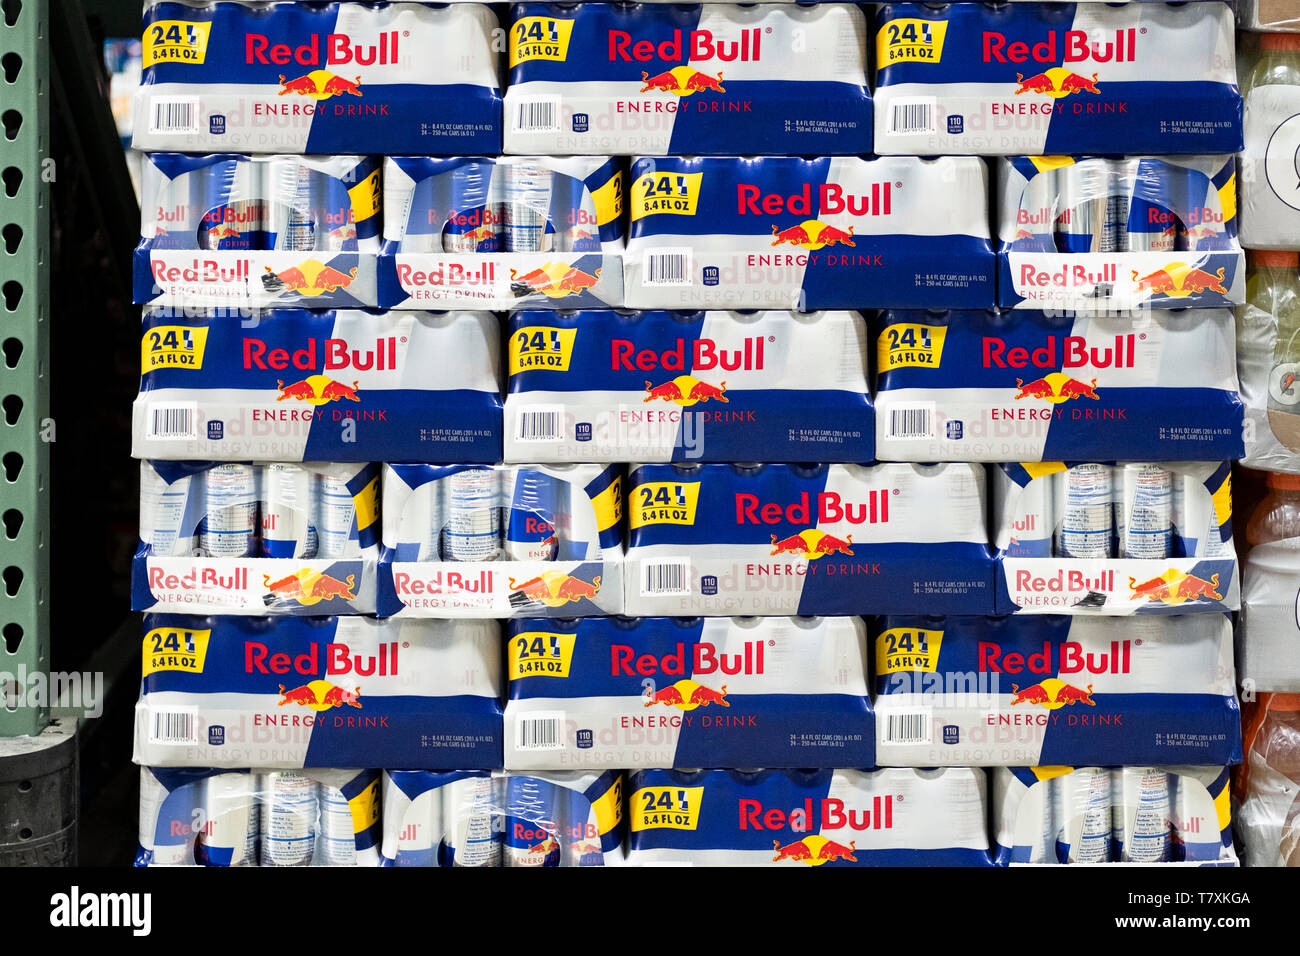 of Red Bull energy for sale at BJ's Wholesale Club Whitestone, Queens, New York Stock Photo - Alamy